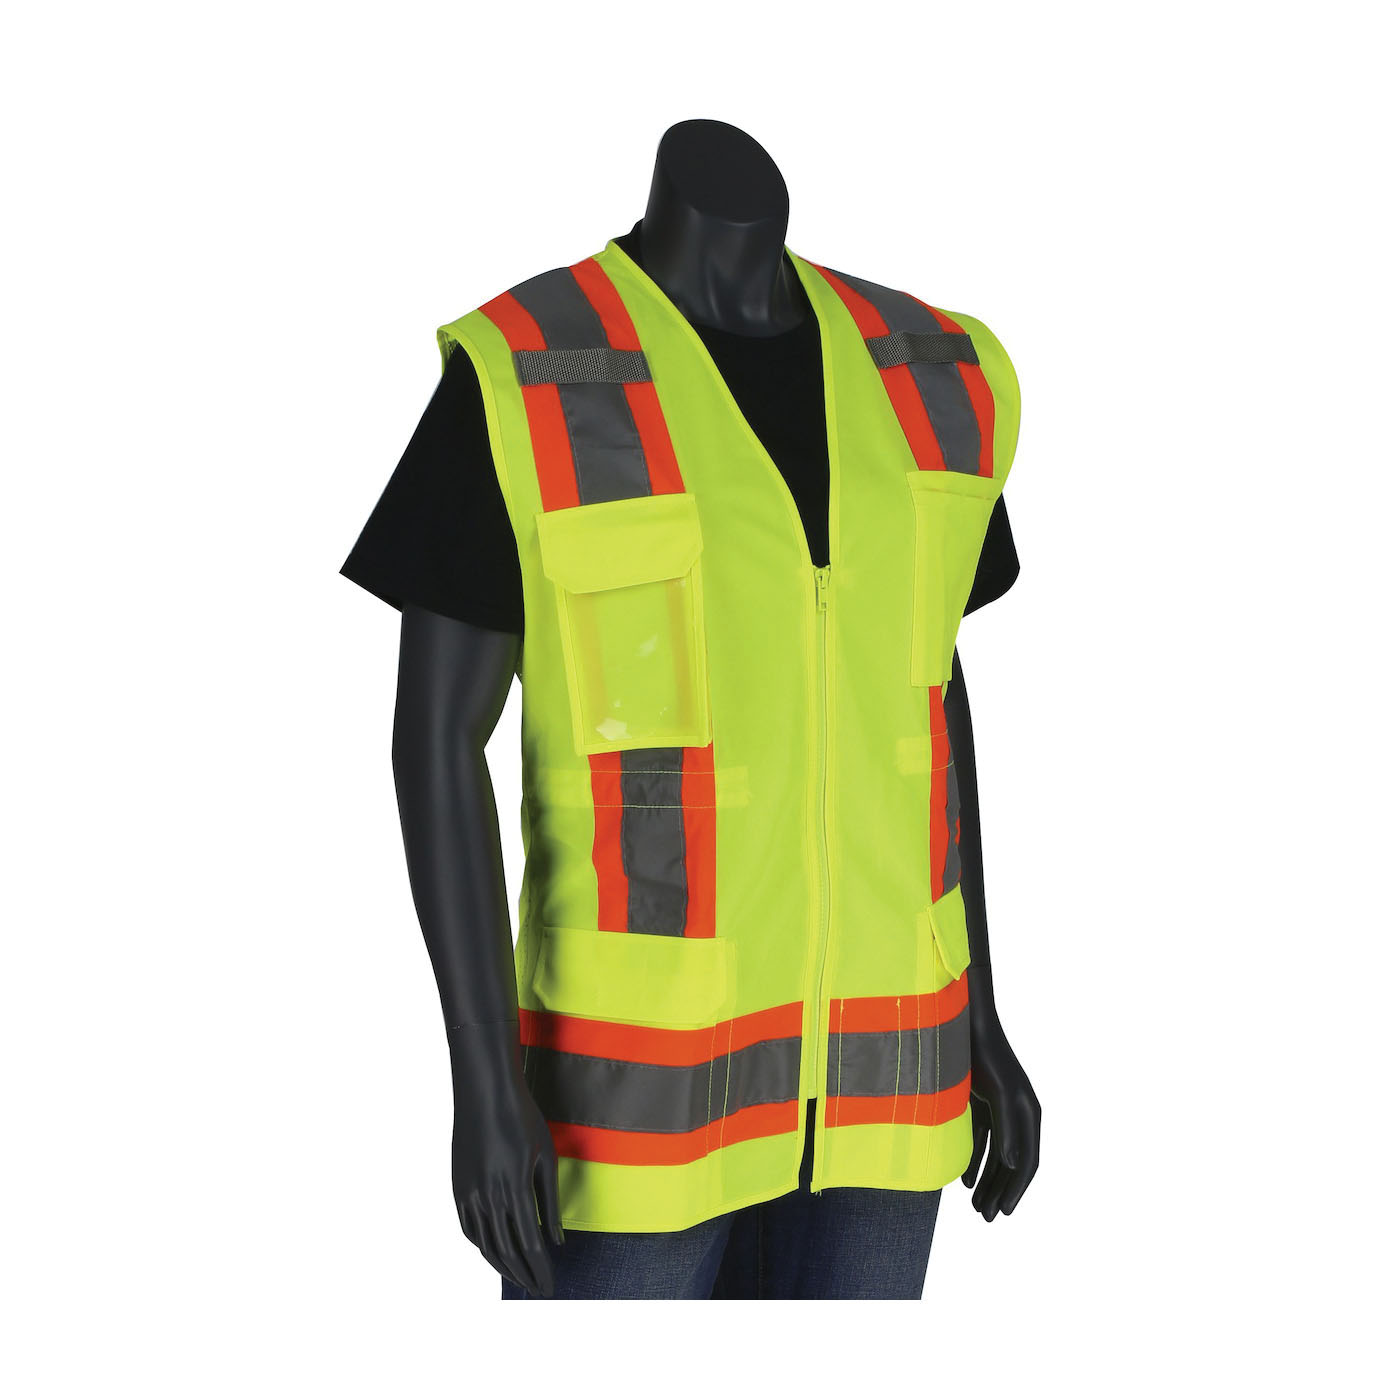 PIP® 302-0512-LY/L 2-Tone Contoured Surveyor's Vest With Solid Front and Mesh Back, L, Hi-Vis Yellow, 100% Polyester Mesh/Solid Tricot Knit, Zipper Closure, 11 Pockets, ANSI Class: Type/Class R2